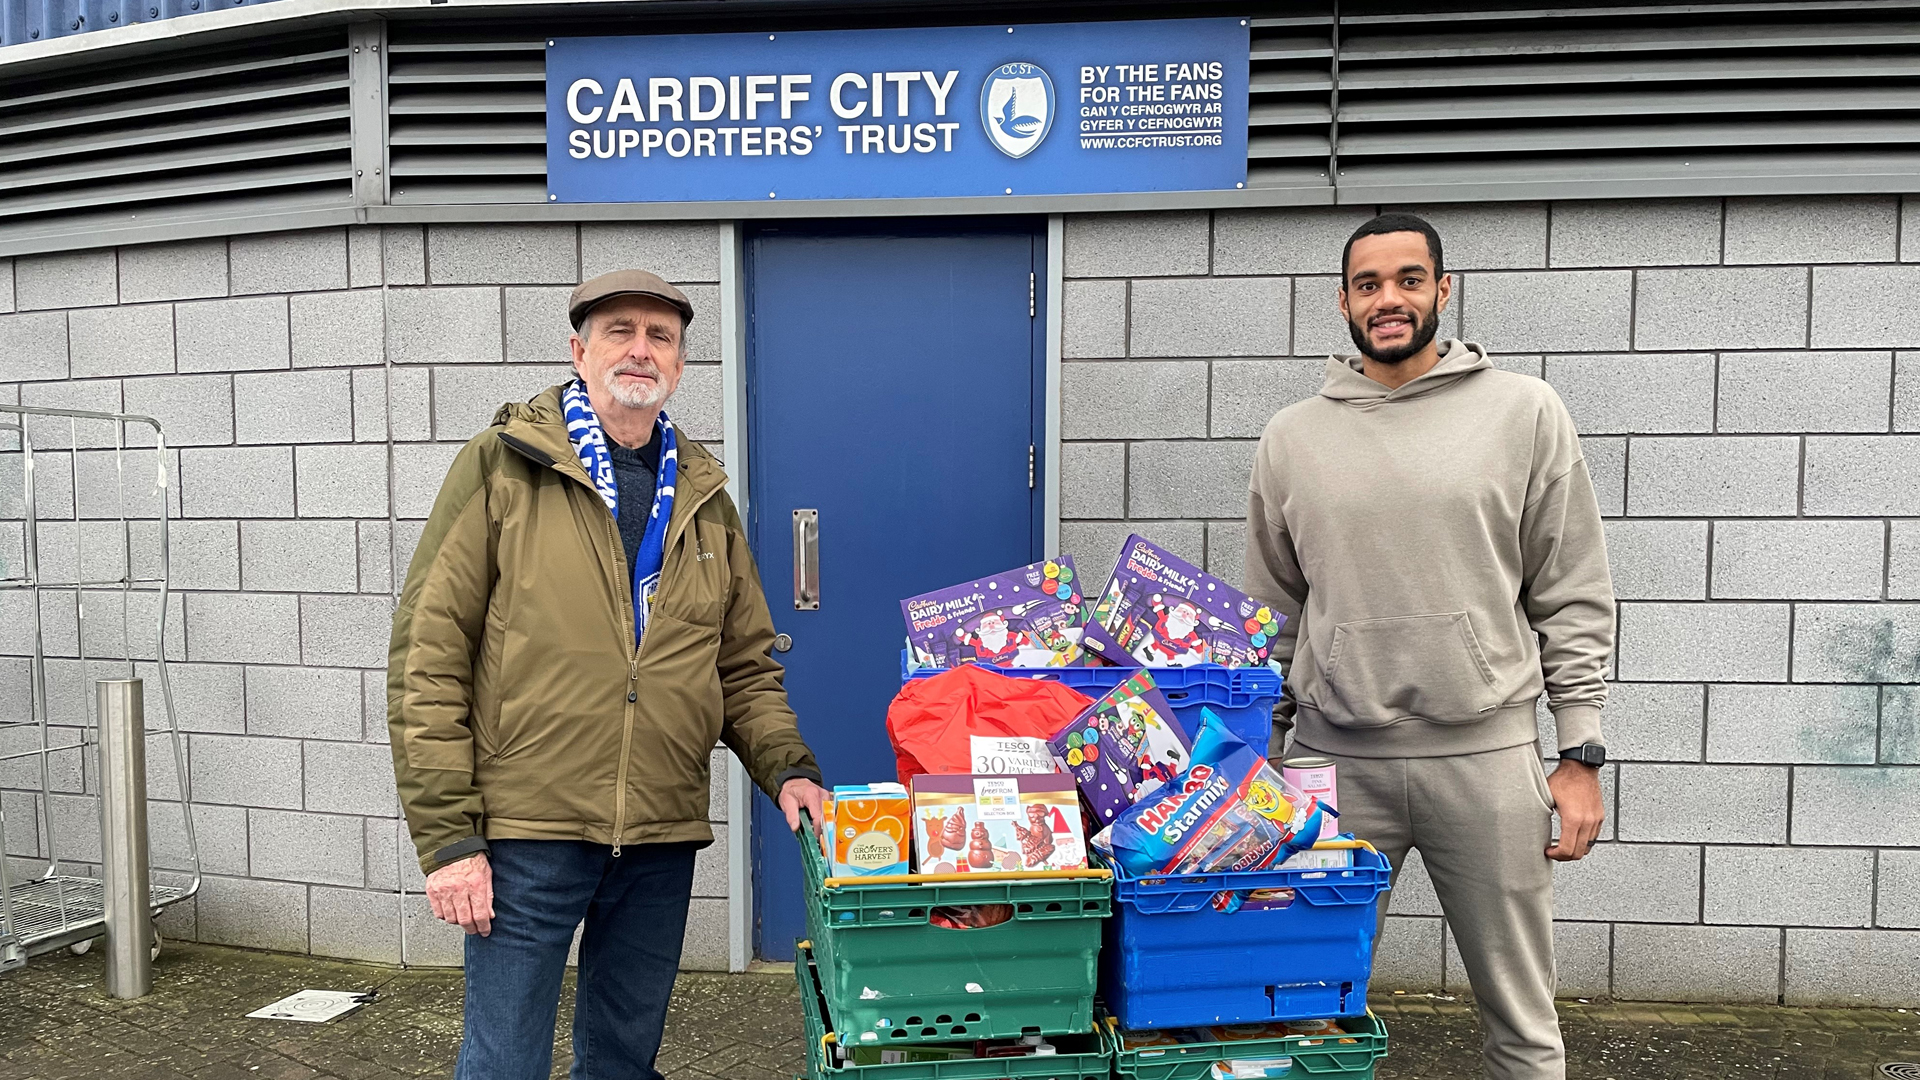 Curtis Nelson helping with a donation to a Foodbank